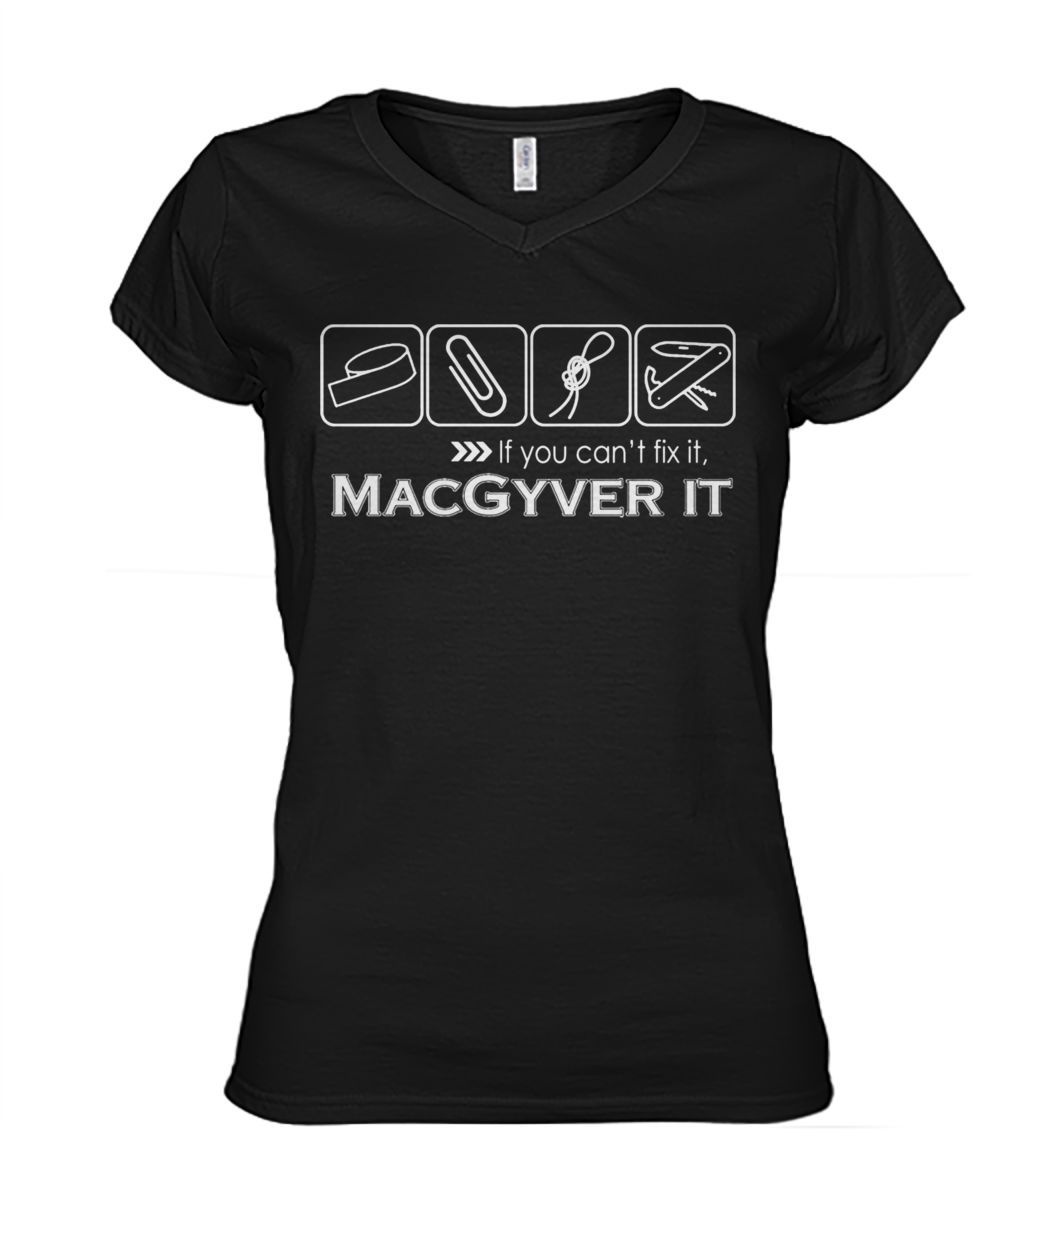 If you can't fix it macgyver it women's v-neck